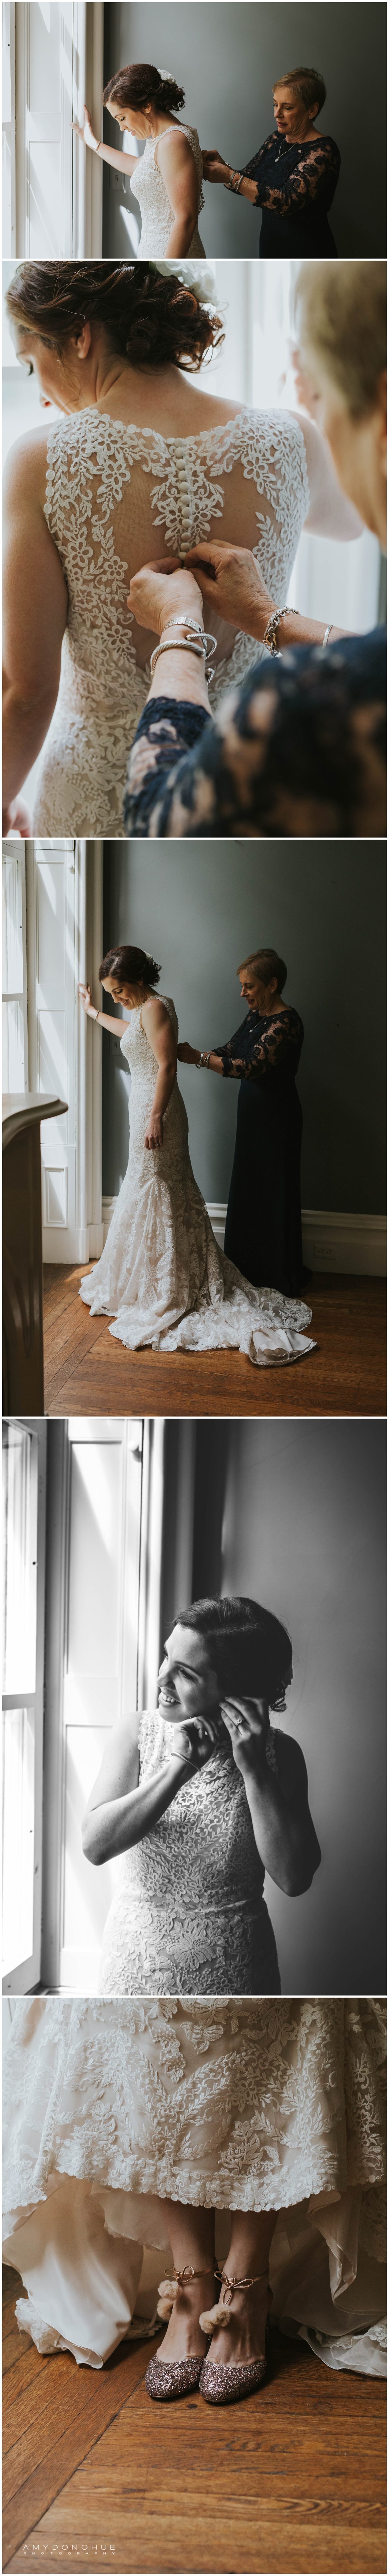 Getting into the dress © Amy Donohue Photography Vermont Wedding Photographer